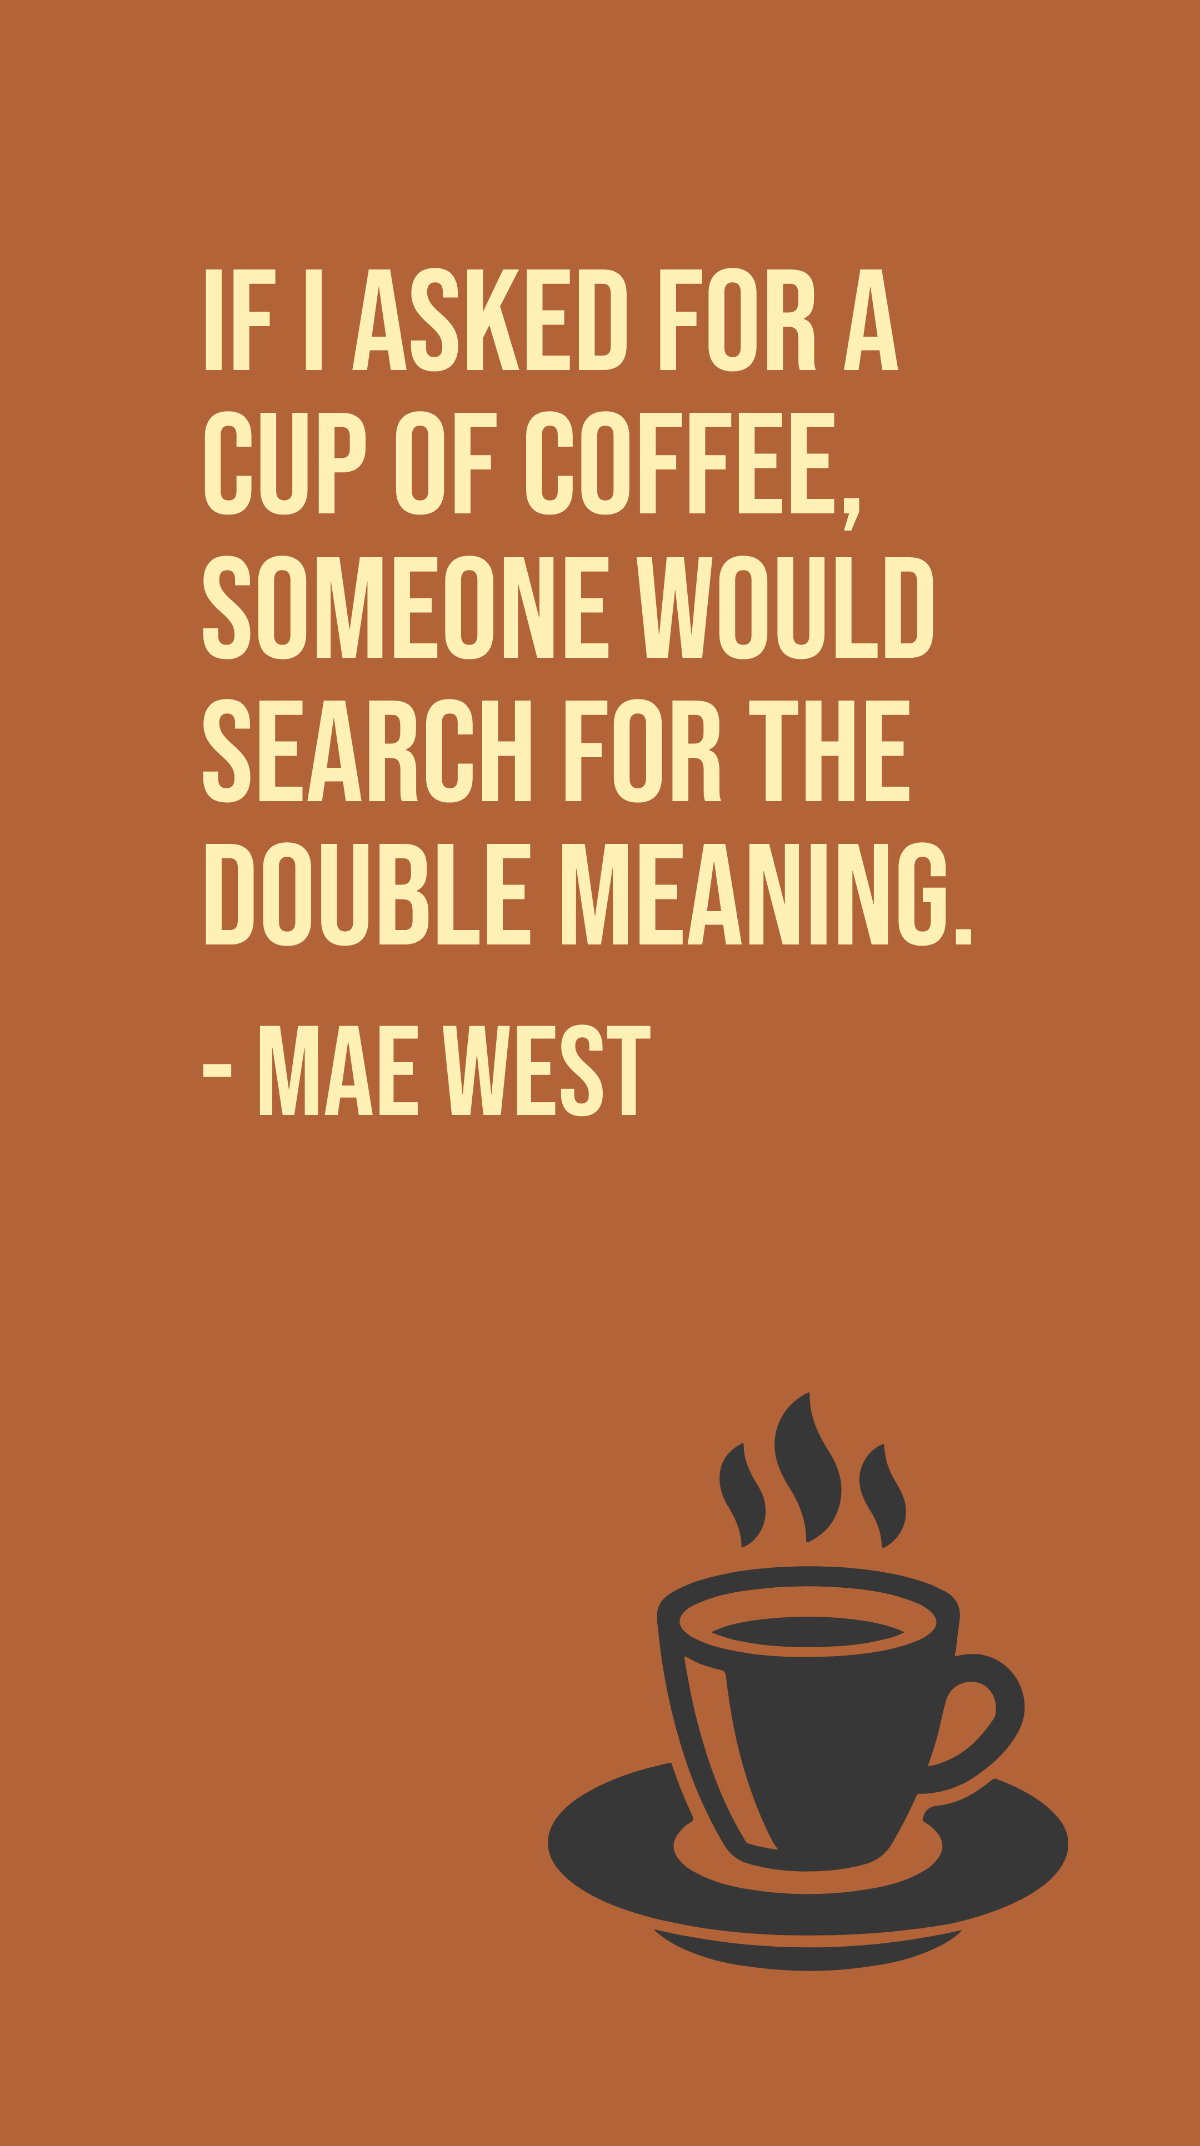 Mae West - If I asked for a cup of coffee, someone would search for the double meaning.